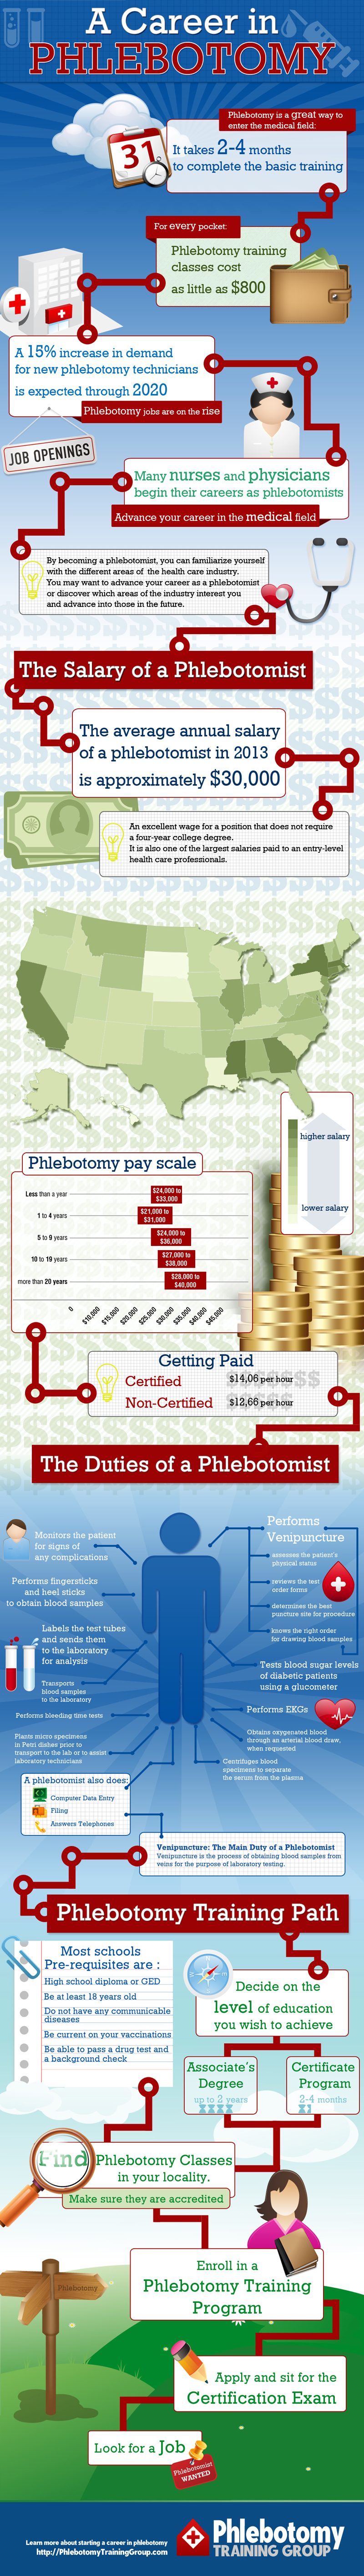 Infographic: A Career in Phlebotomy